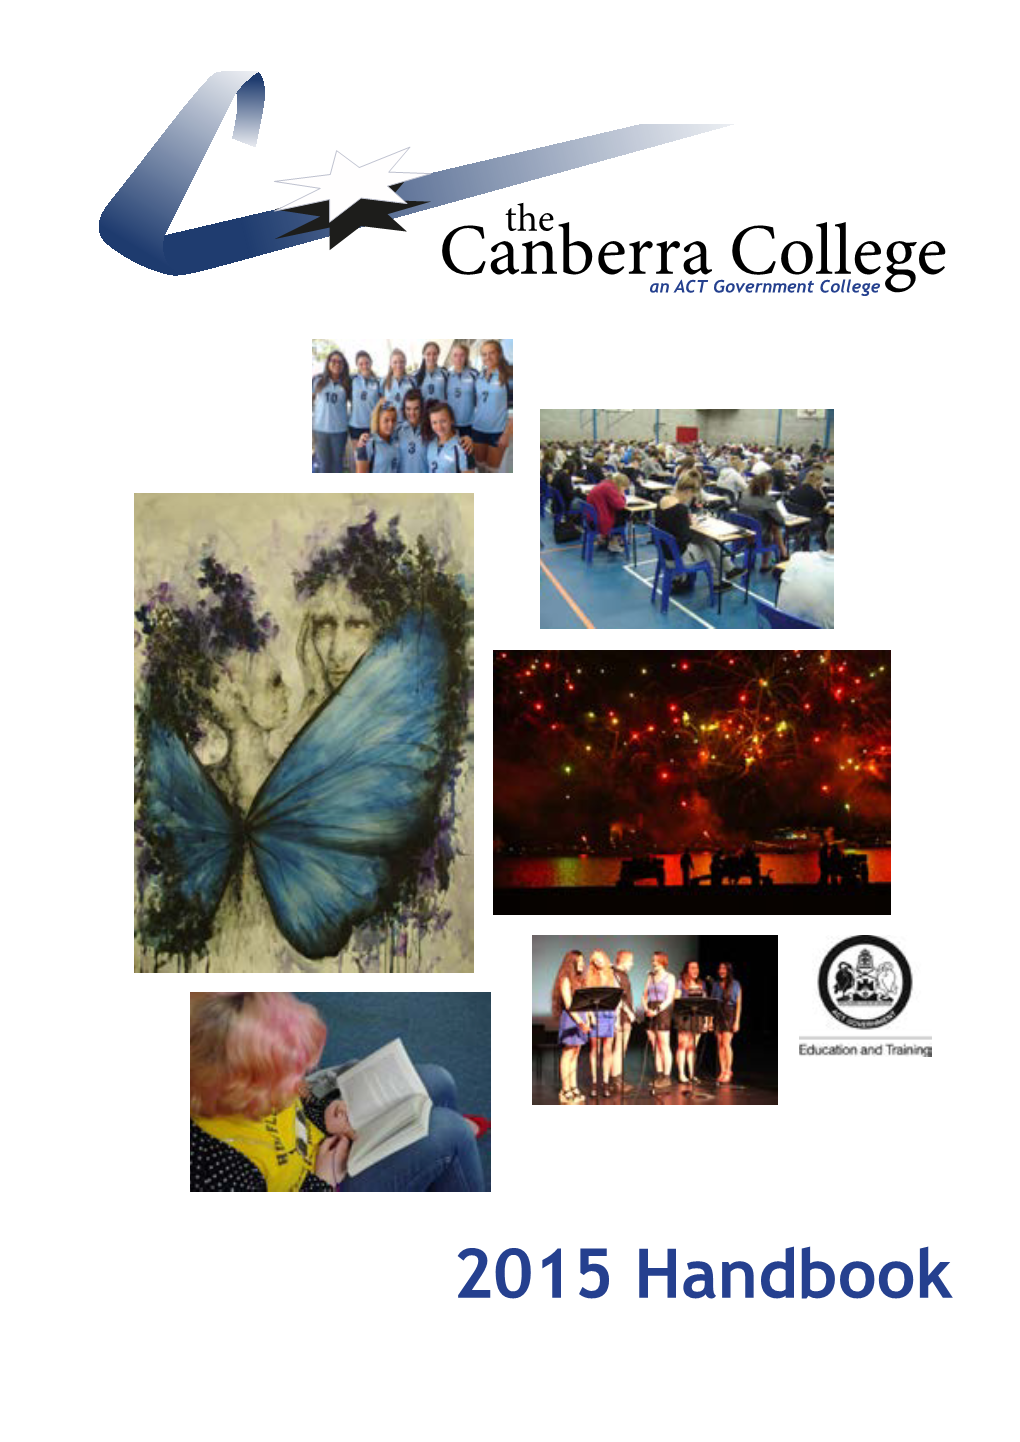 Canberra College Provides a Co-Educational, Comprehensive and Inclusive Curriculum for a Wide Range of Students